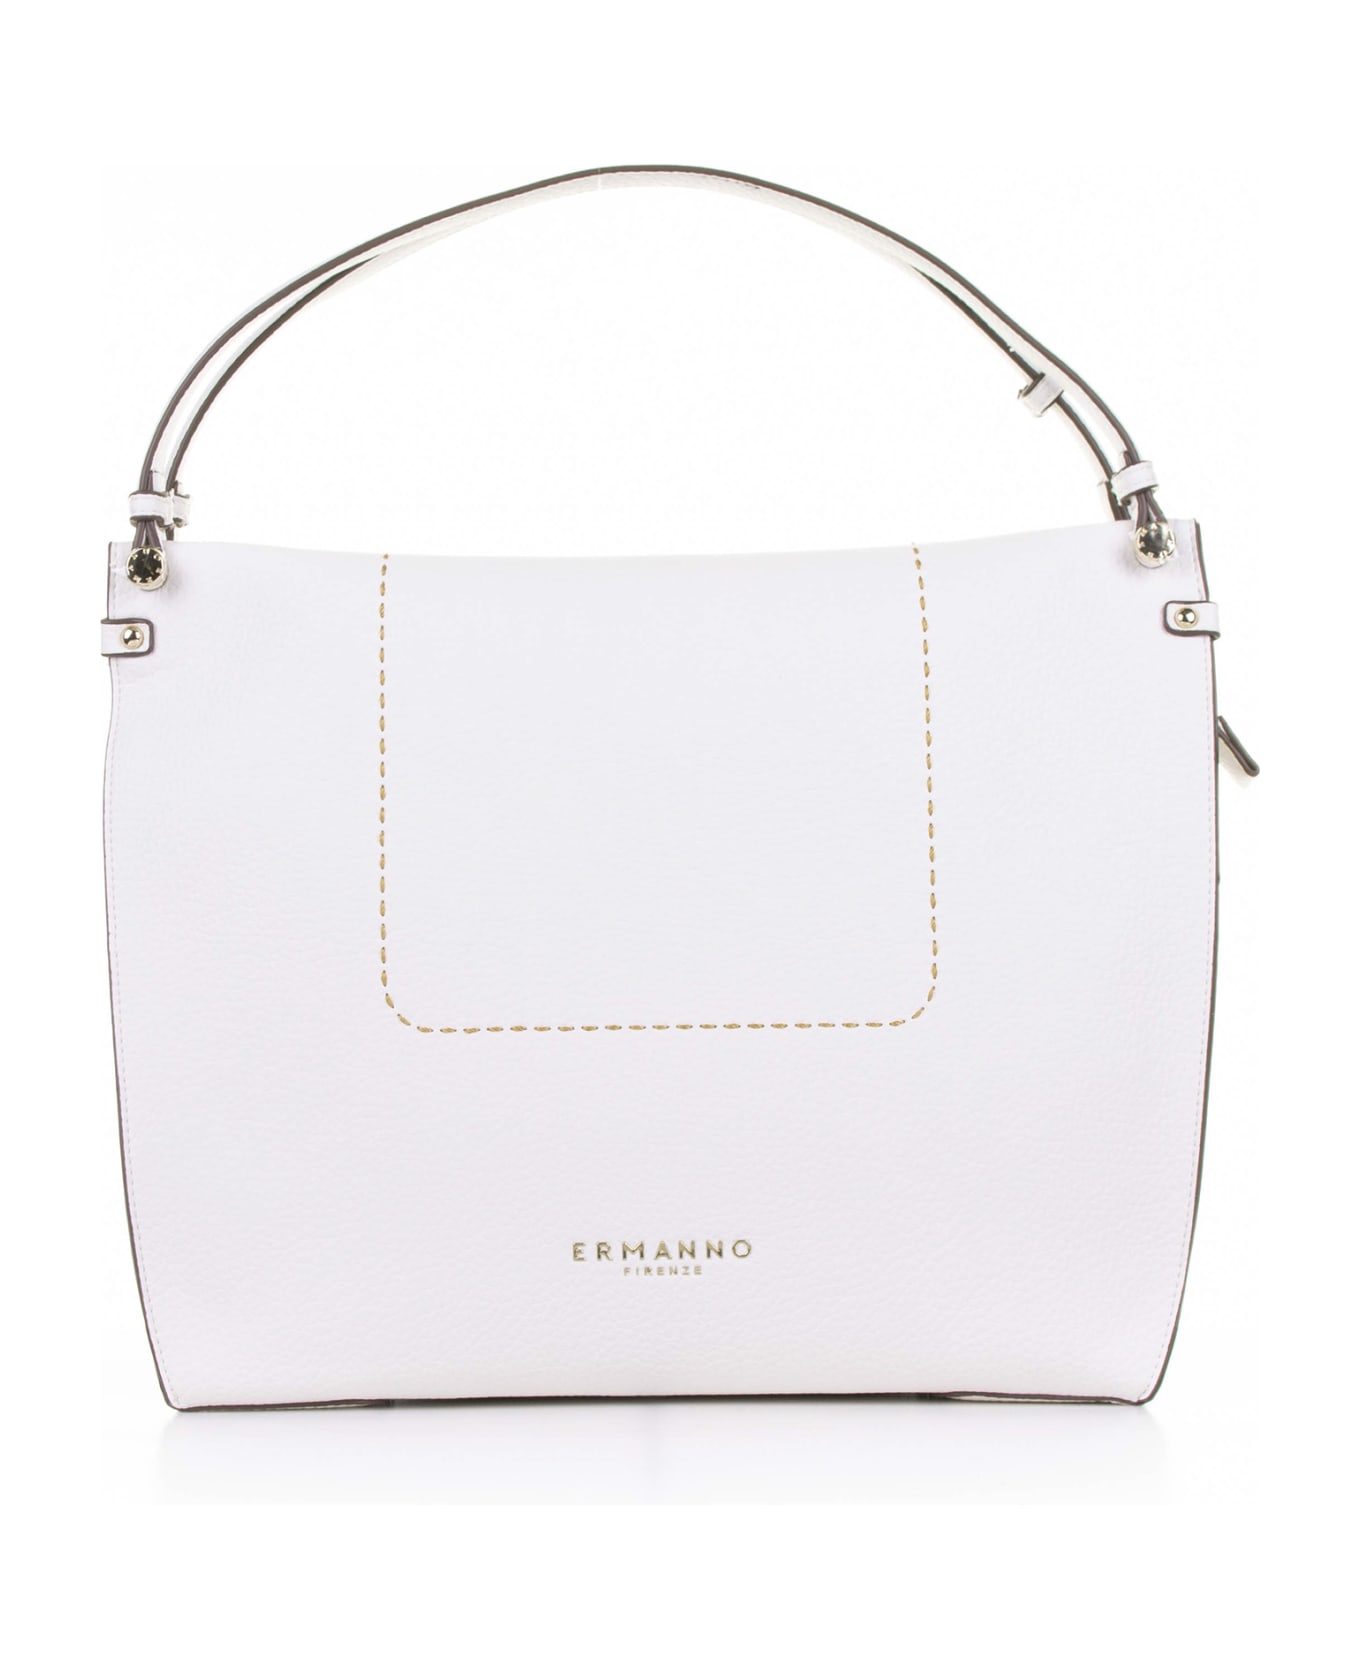 Ermanno Scervino White Petra Shopping Bag In Leather - BIANCO トートバッグ